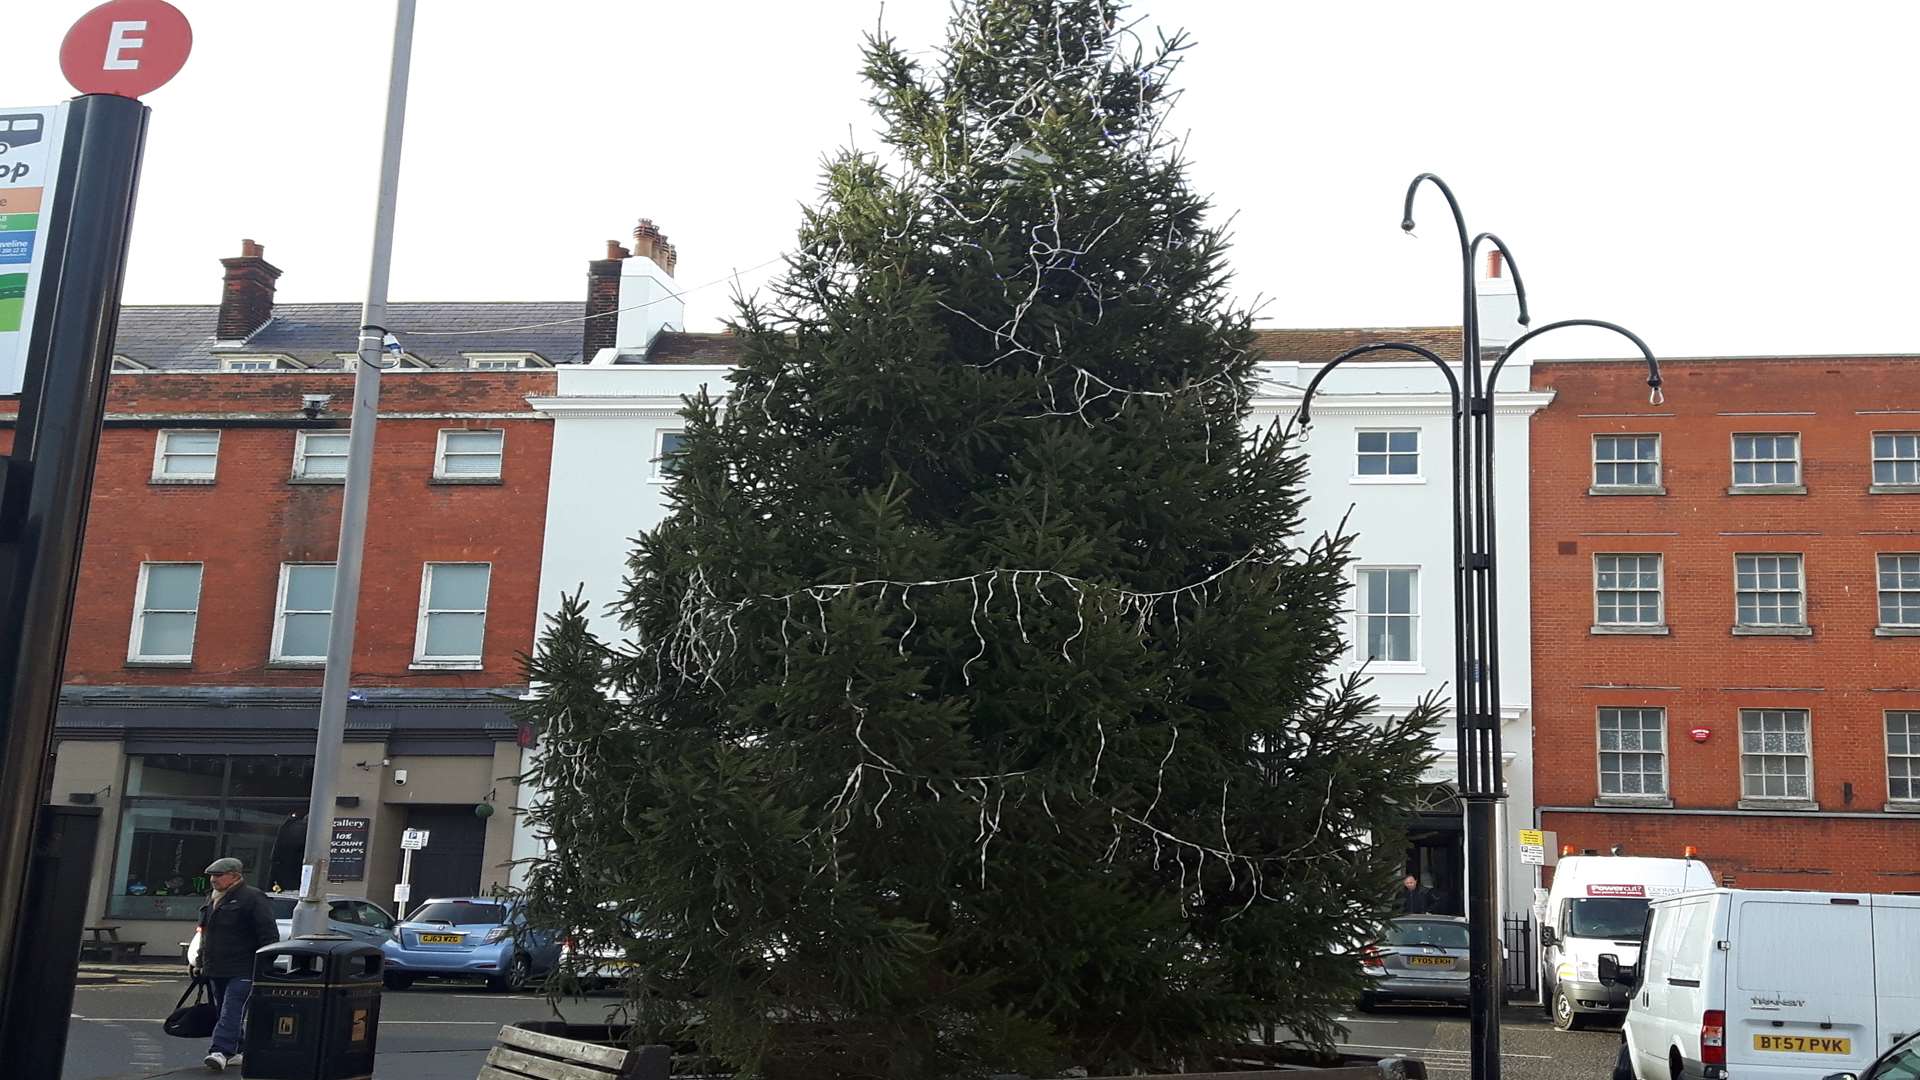 The Christmas tree in Cecil Square